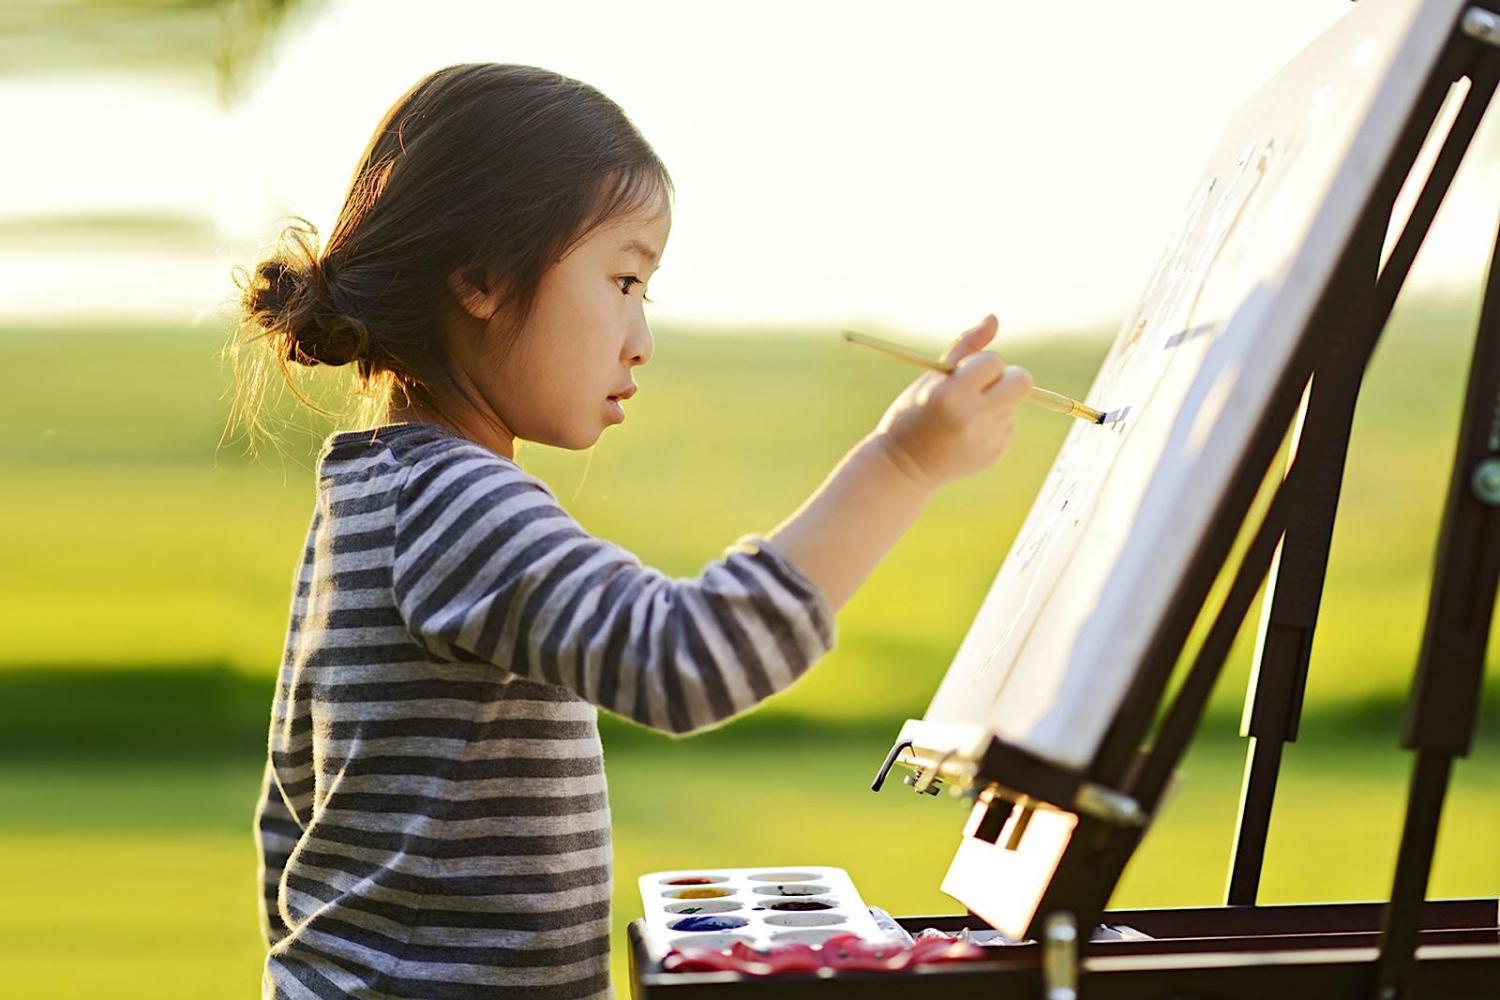 Children's Painting at the Patch with Van GoGo Paint Party
Sat Oct 22, 10:00 AM - Sat Oct 22, 11:30 AM